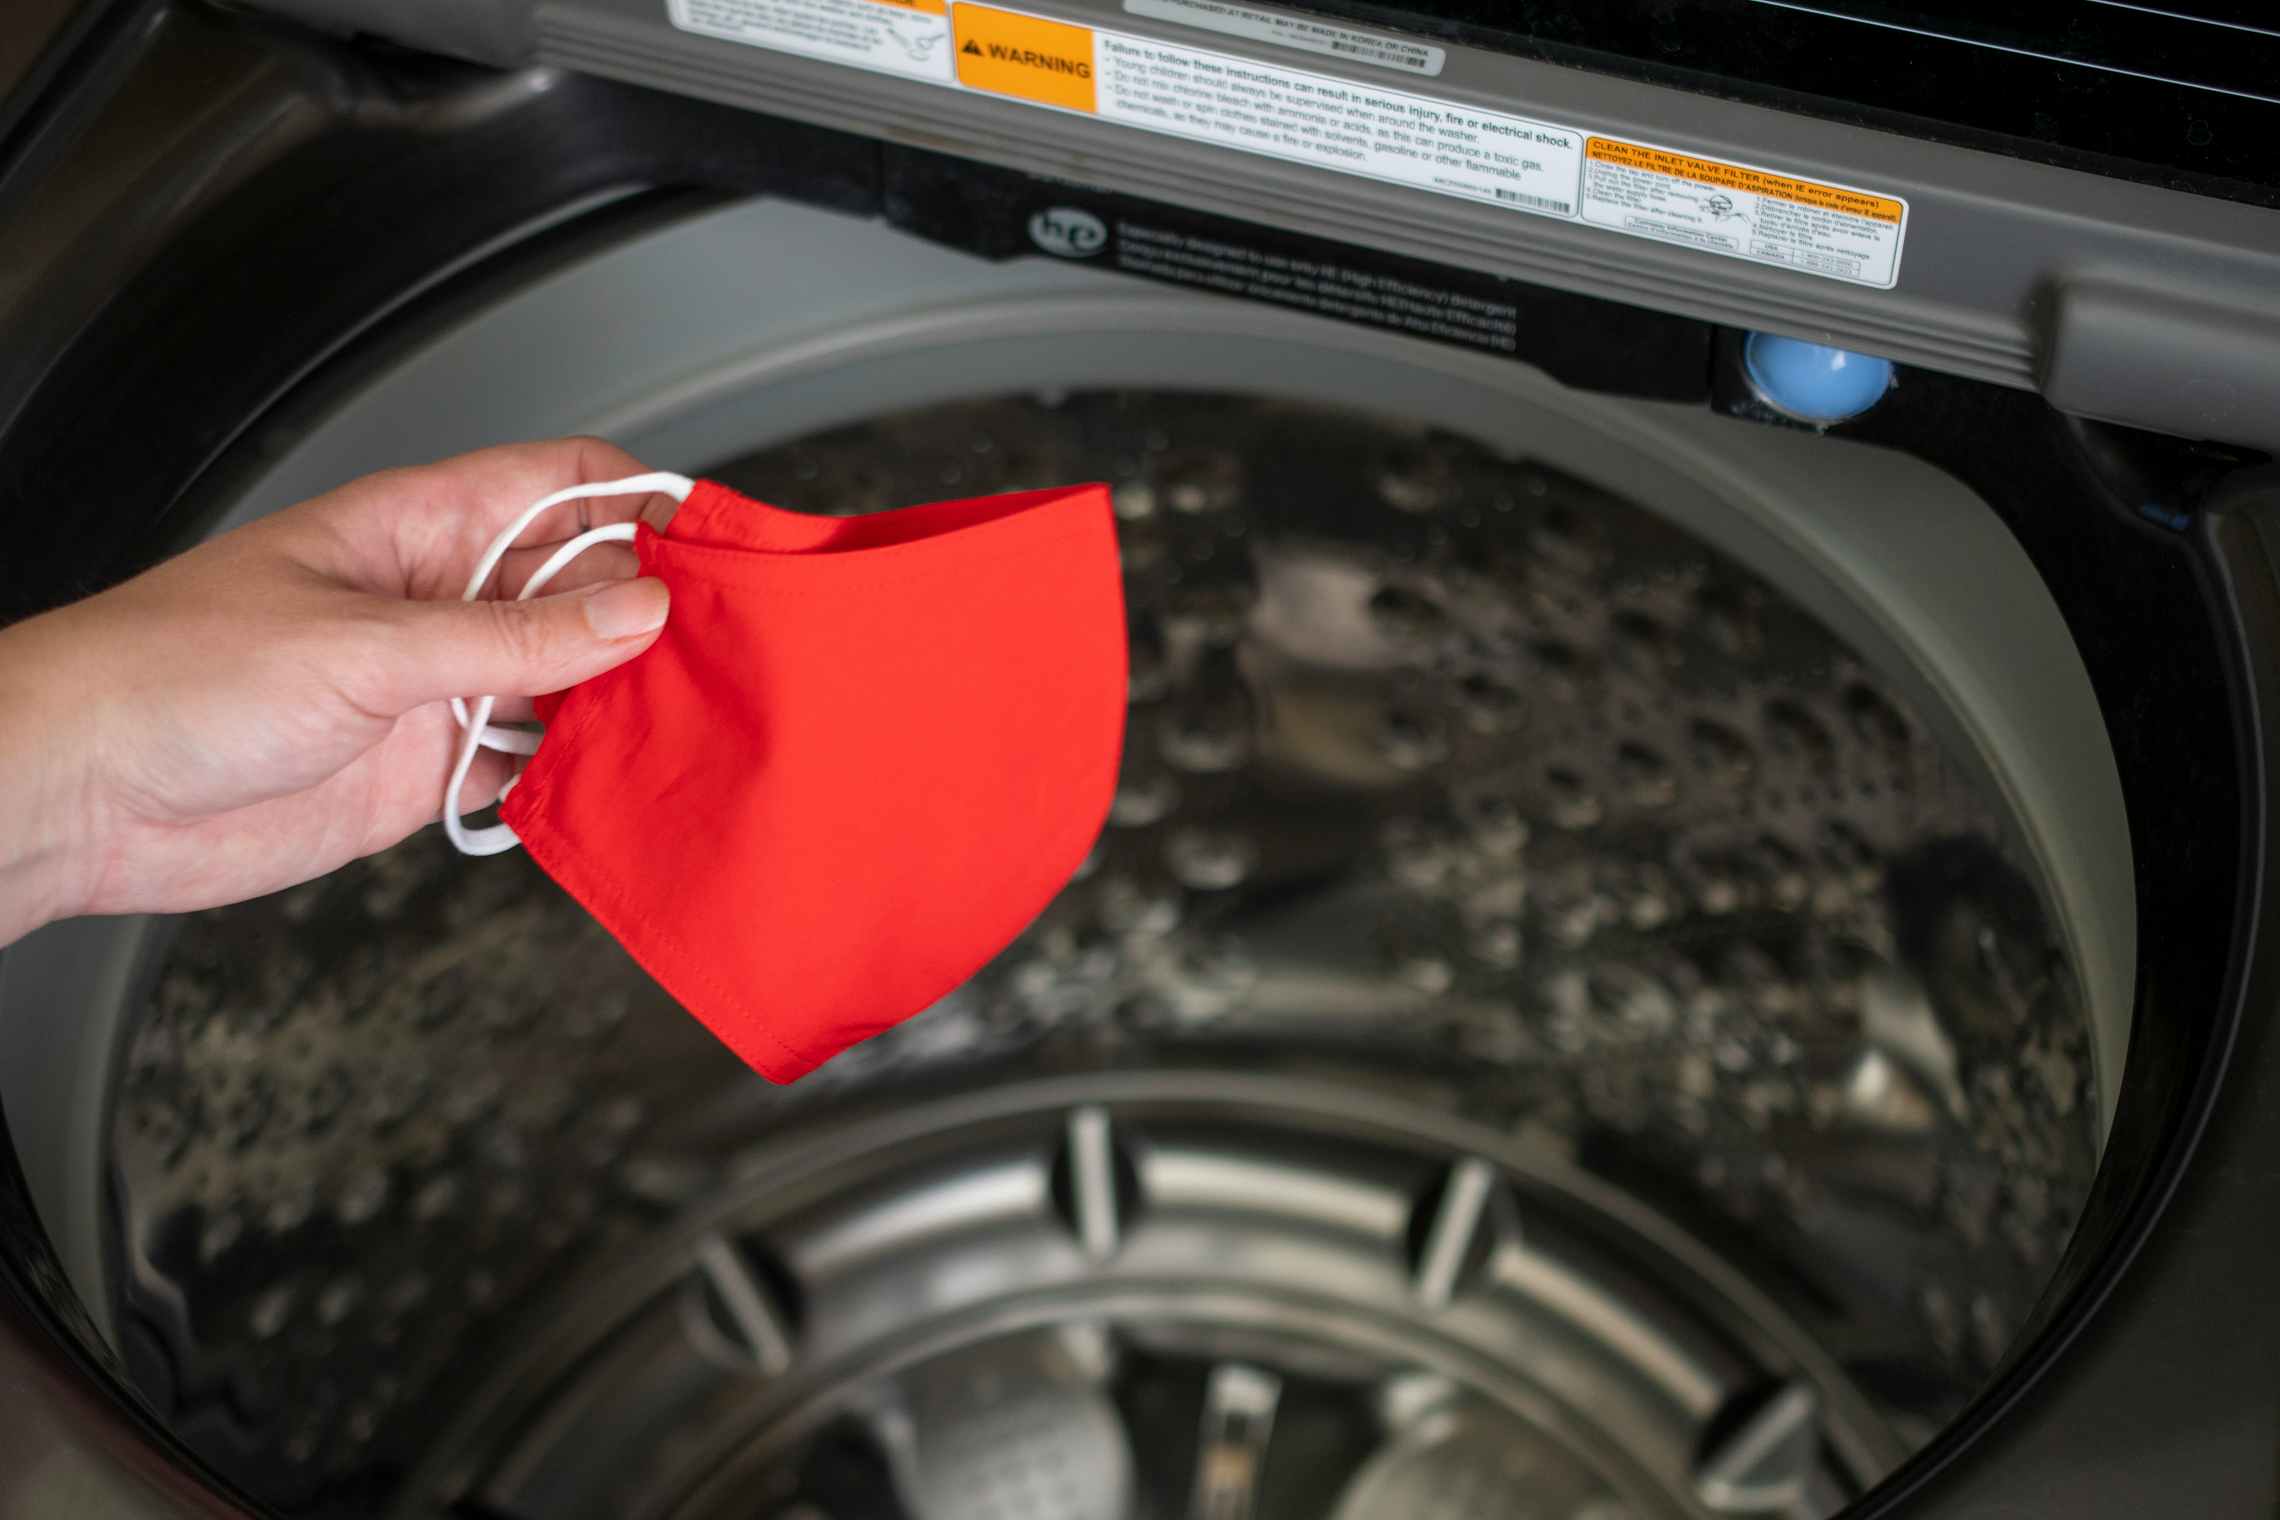 A hand tossing a fabric face mask into a washing machine.